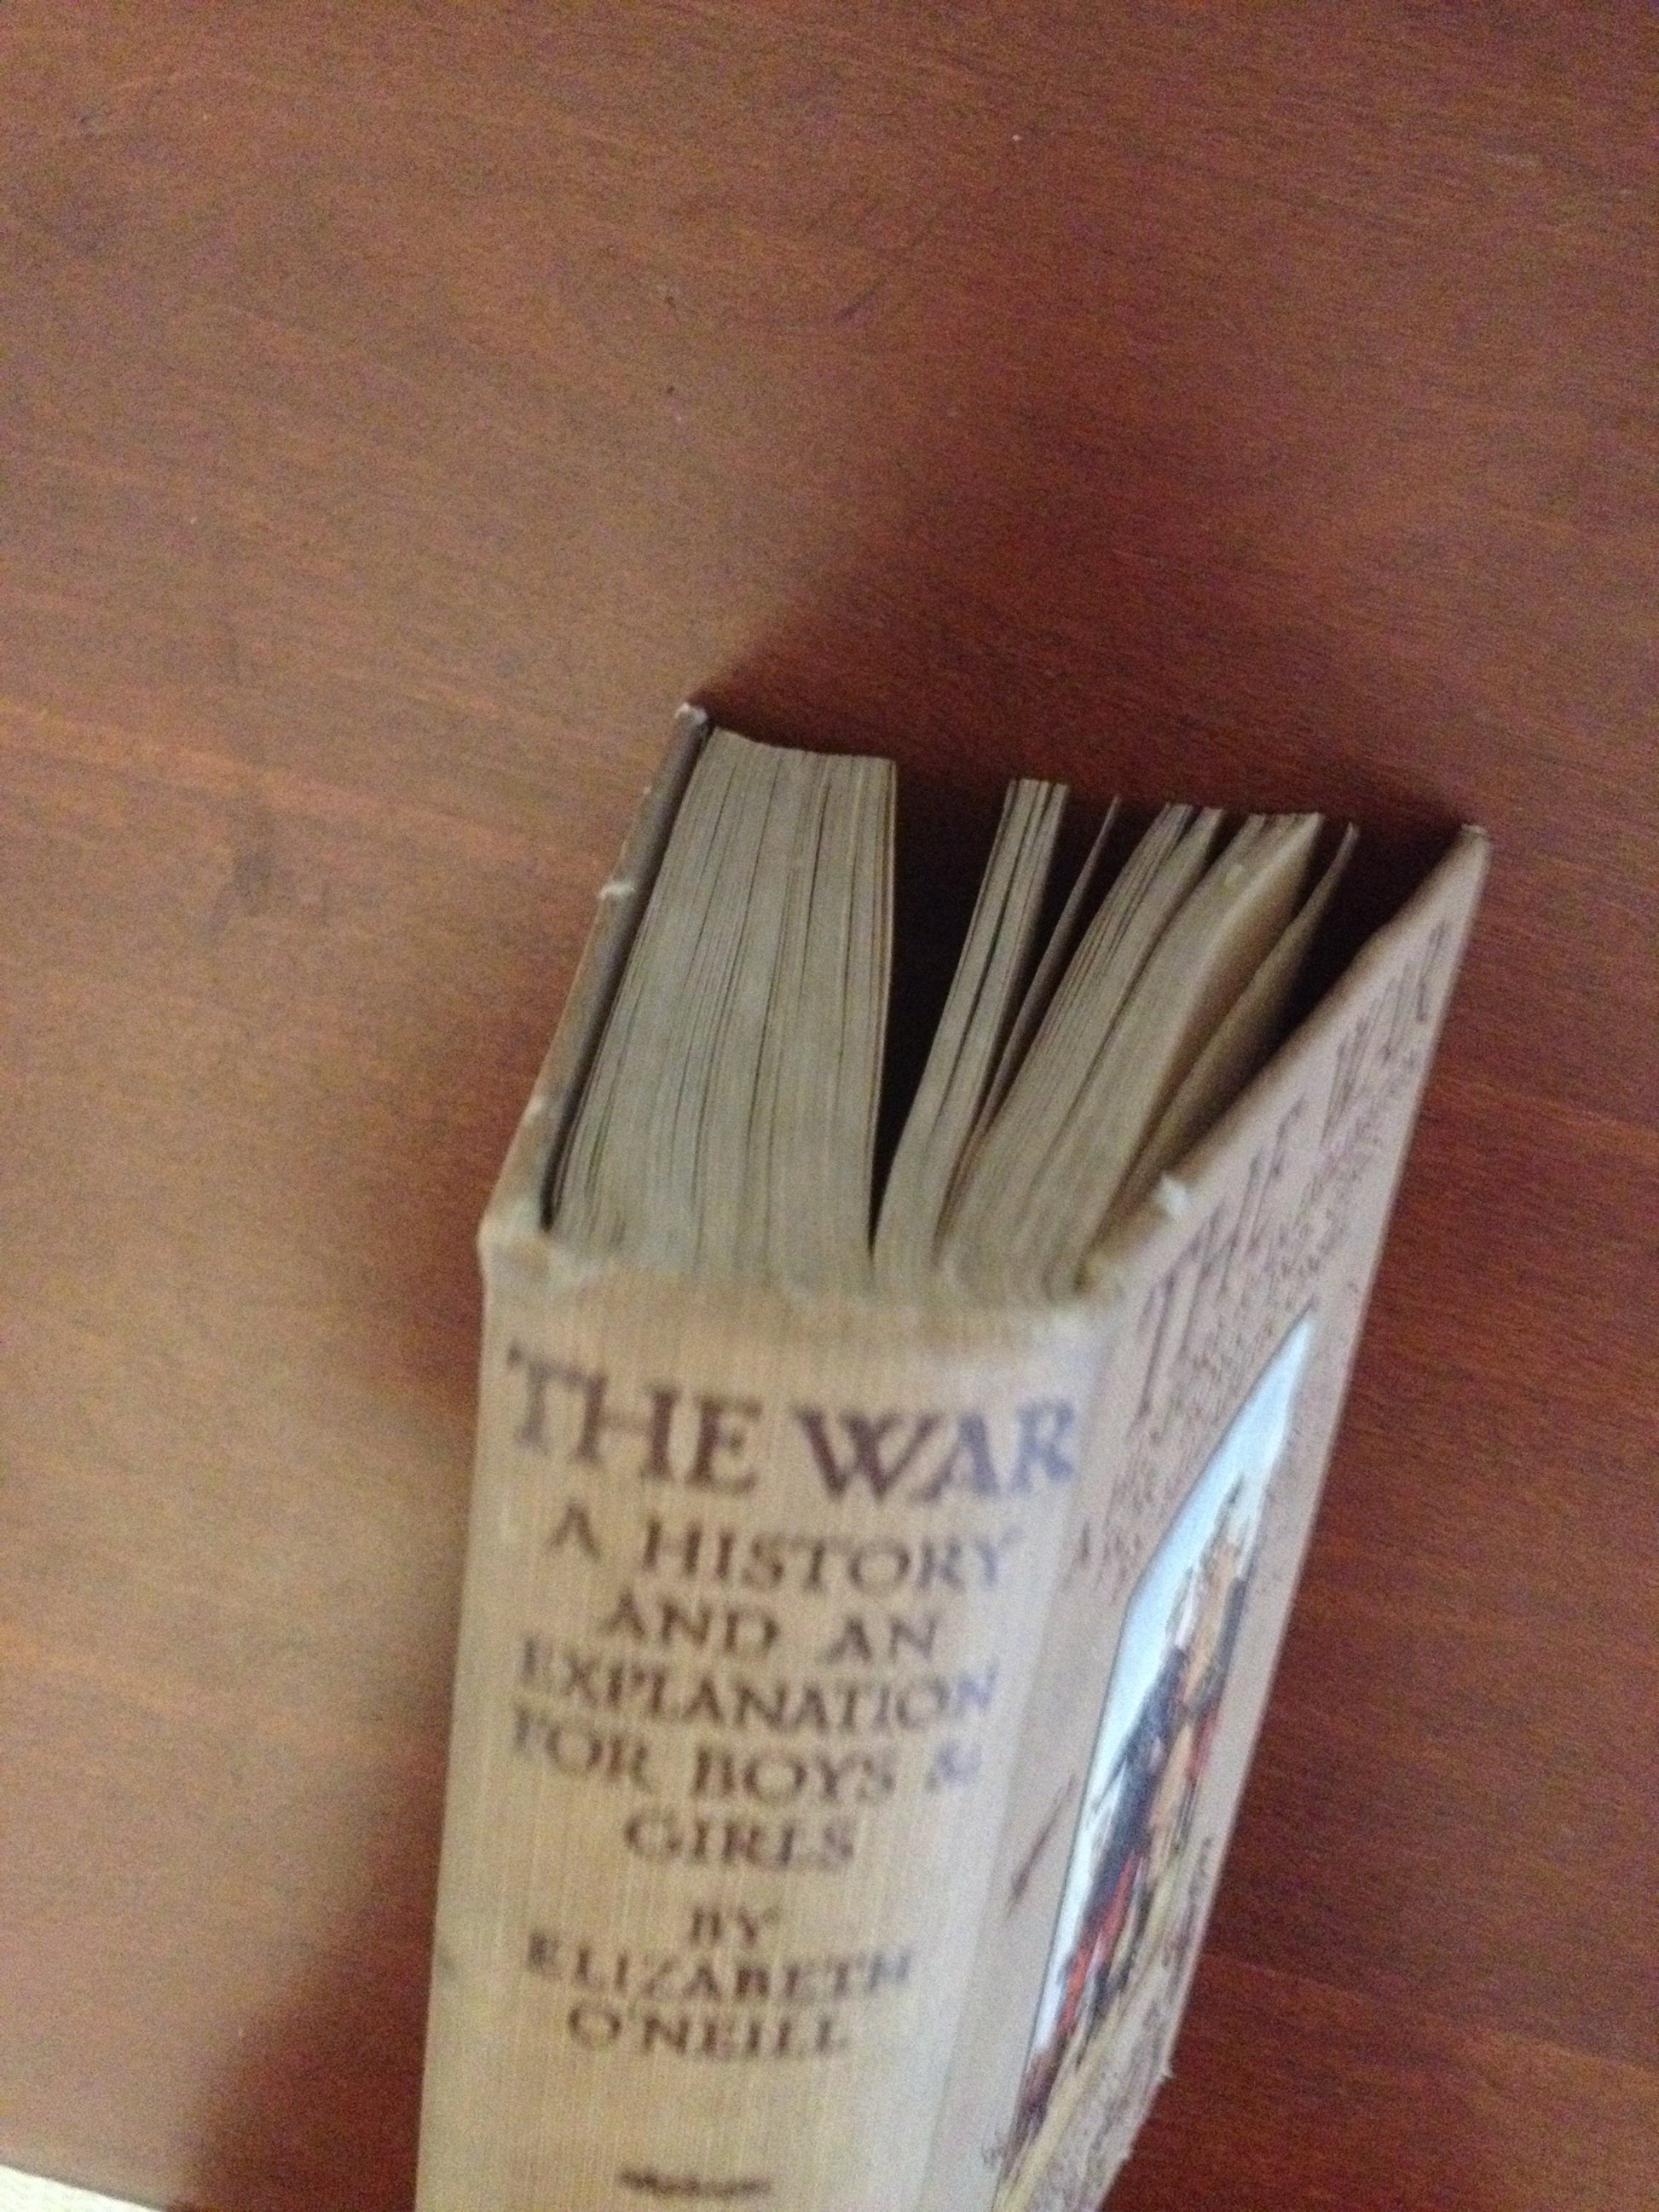 THE WAR - A HISTORY & AN EXPLANATION FOR BOYS AND GIRLS  BY: ELIZABETH O'NEILL BooksCardsNBikes